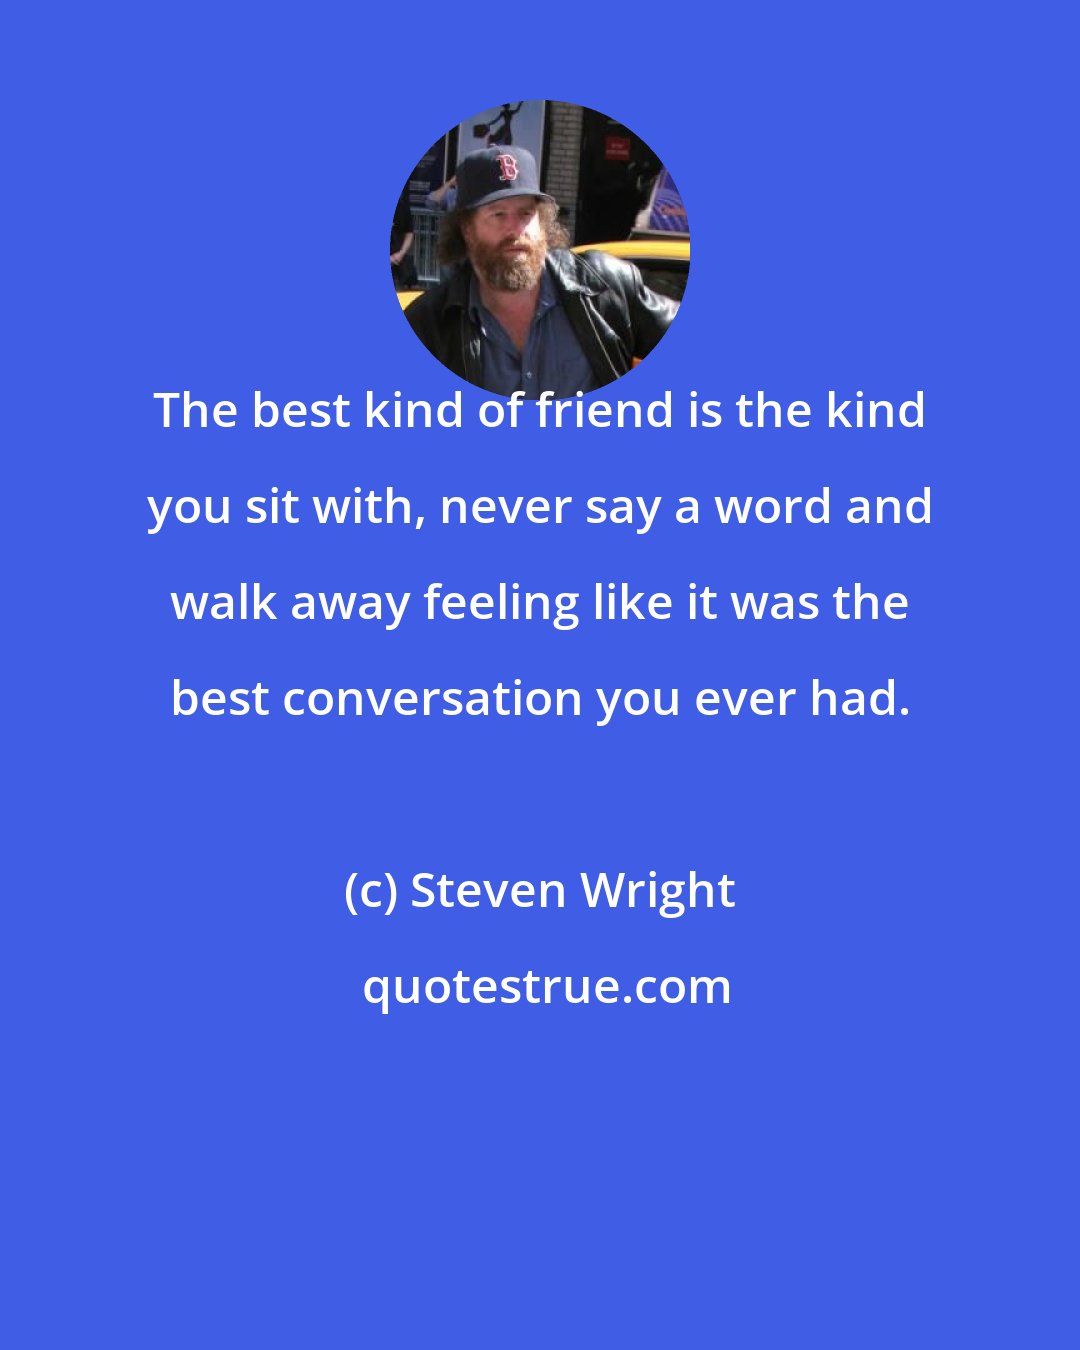 Steven Wright: The best kind of friend is the kind you sit with, never say a word and walk away feeling like it was the best conversation you ever had.